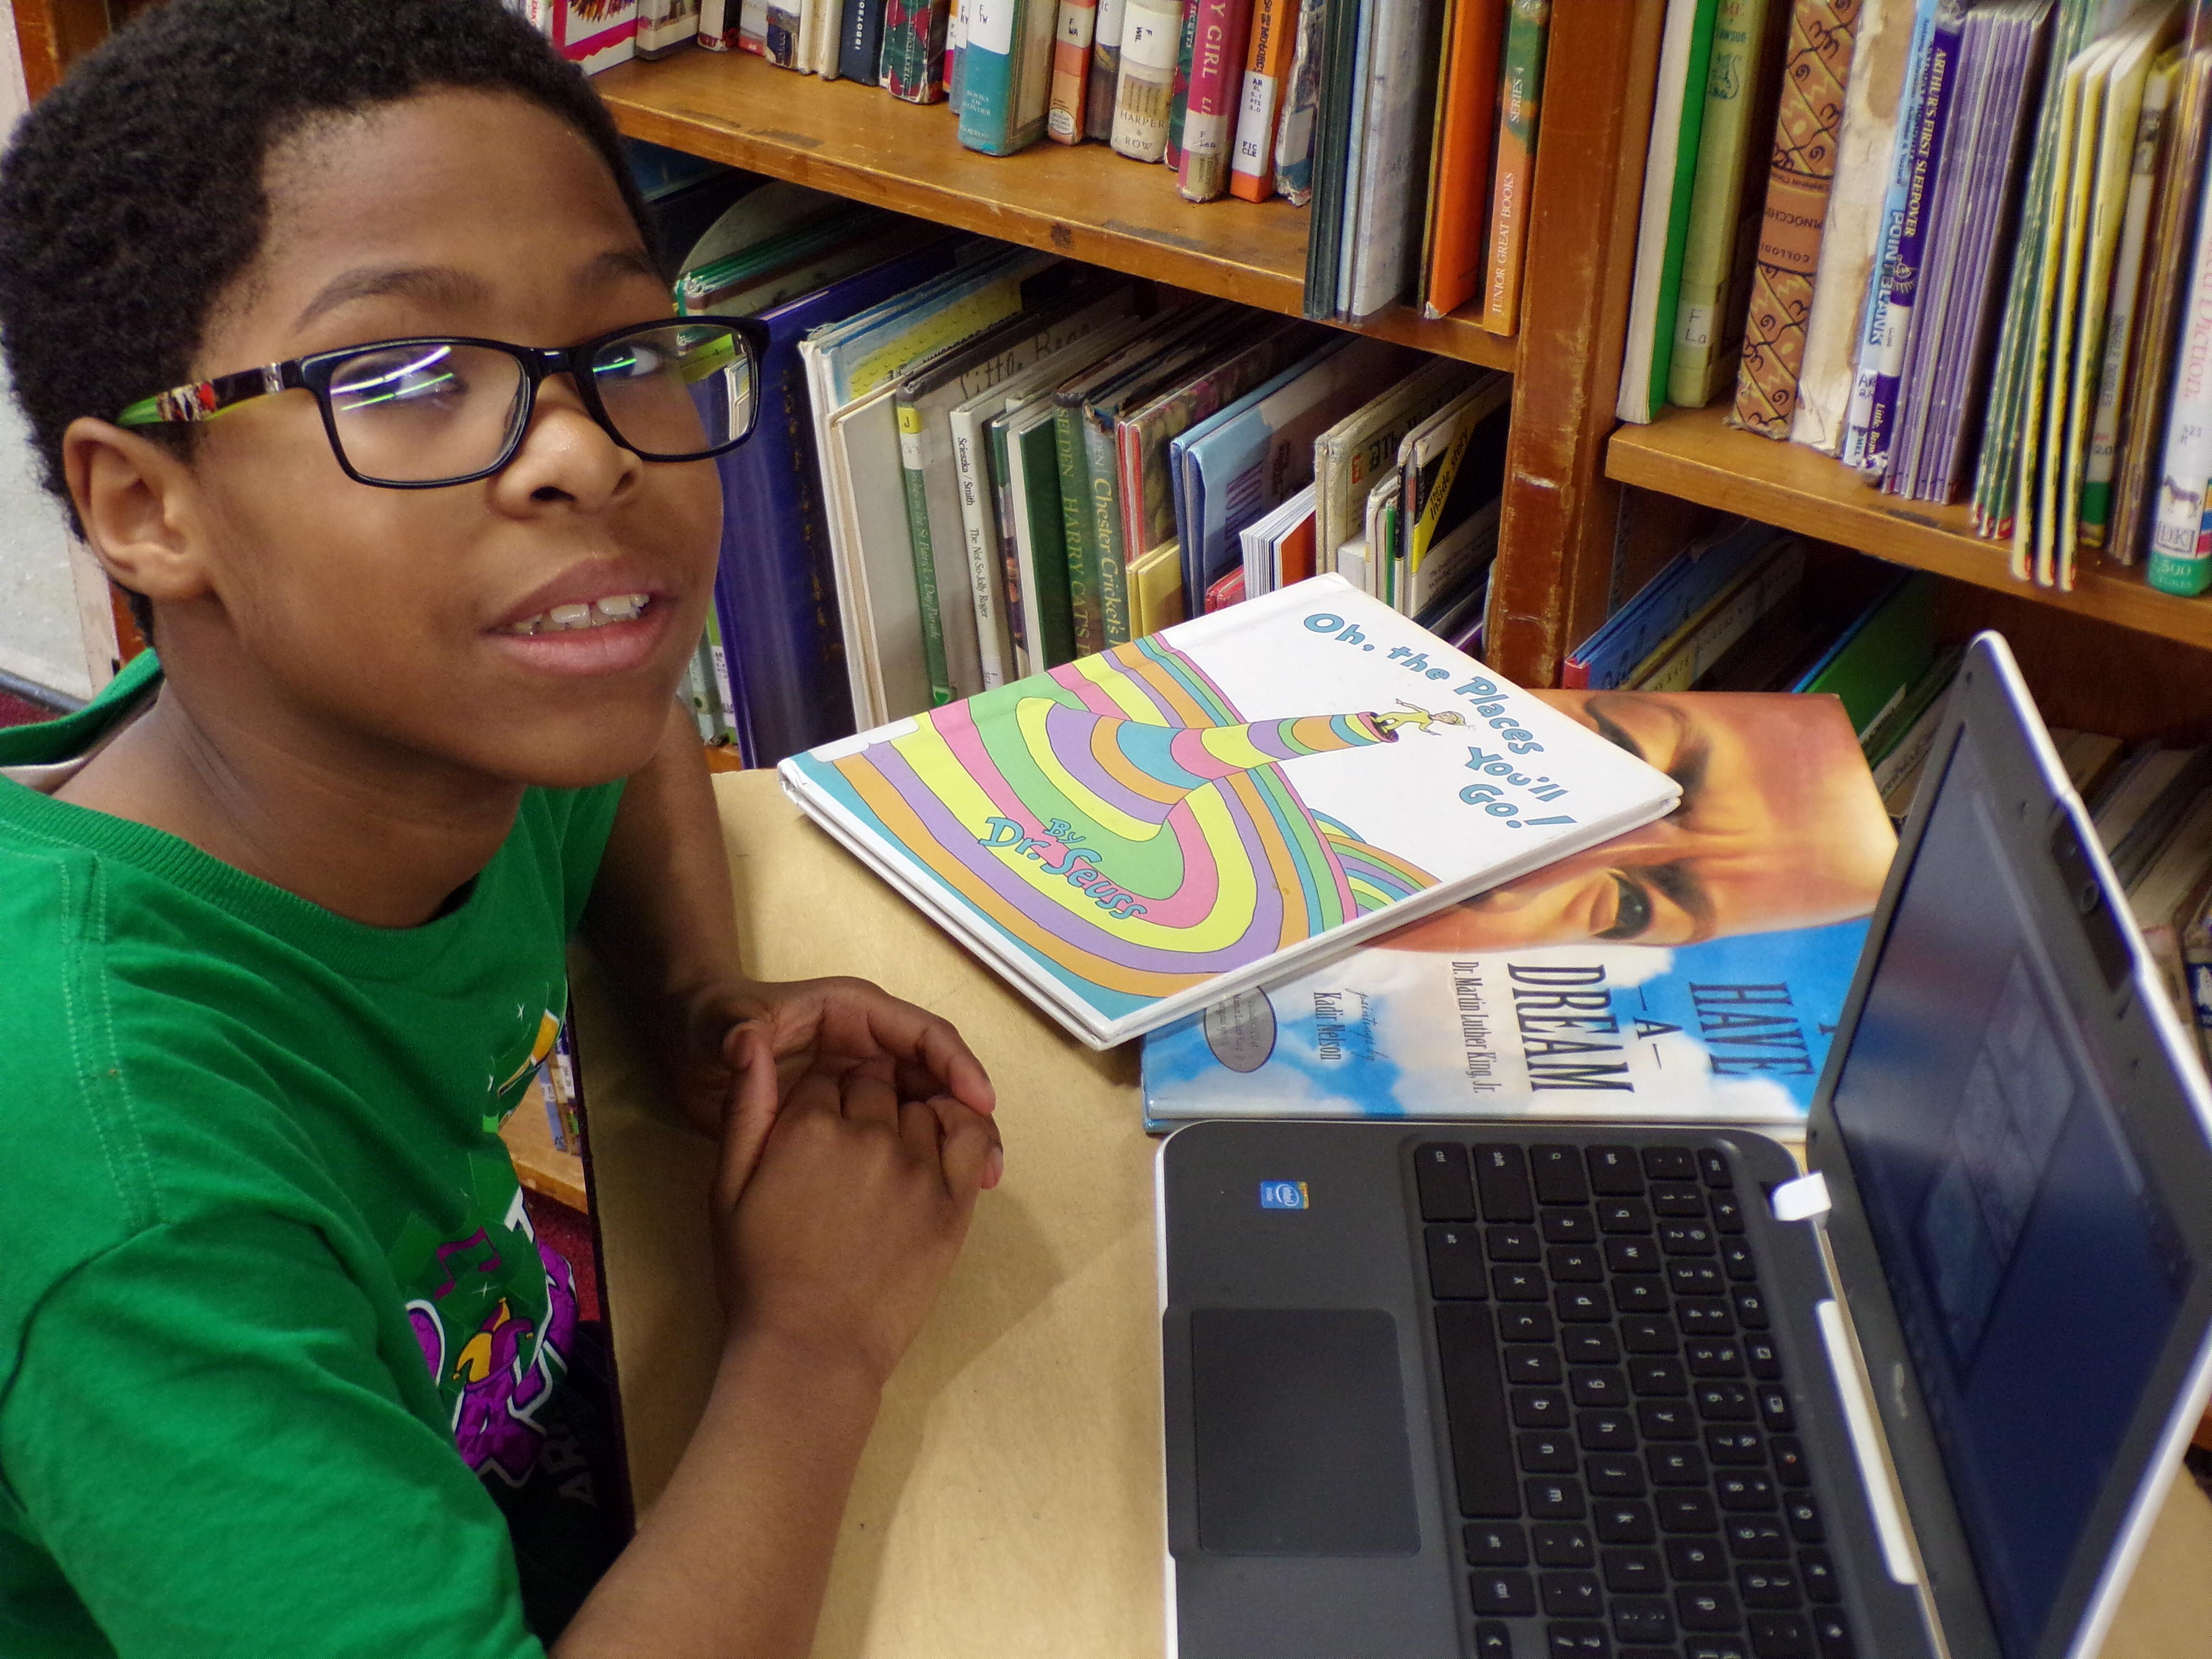 A photo of Michael Banner, Jr. who read 96 books for the month of February at PRAMs